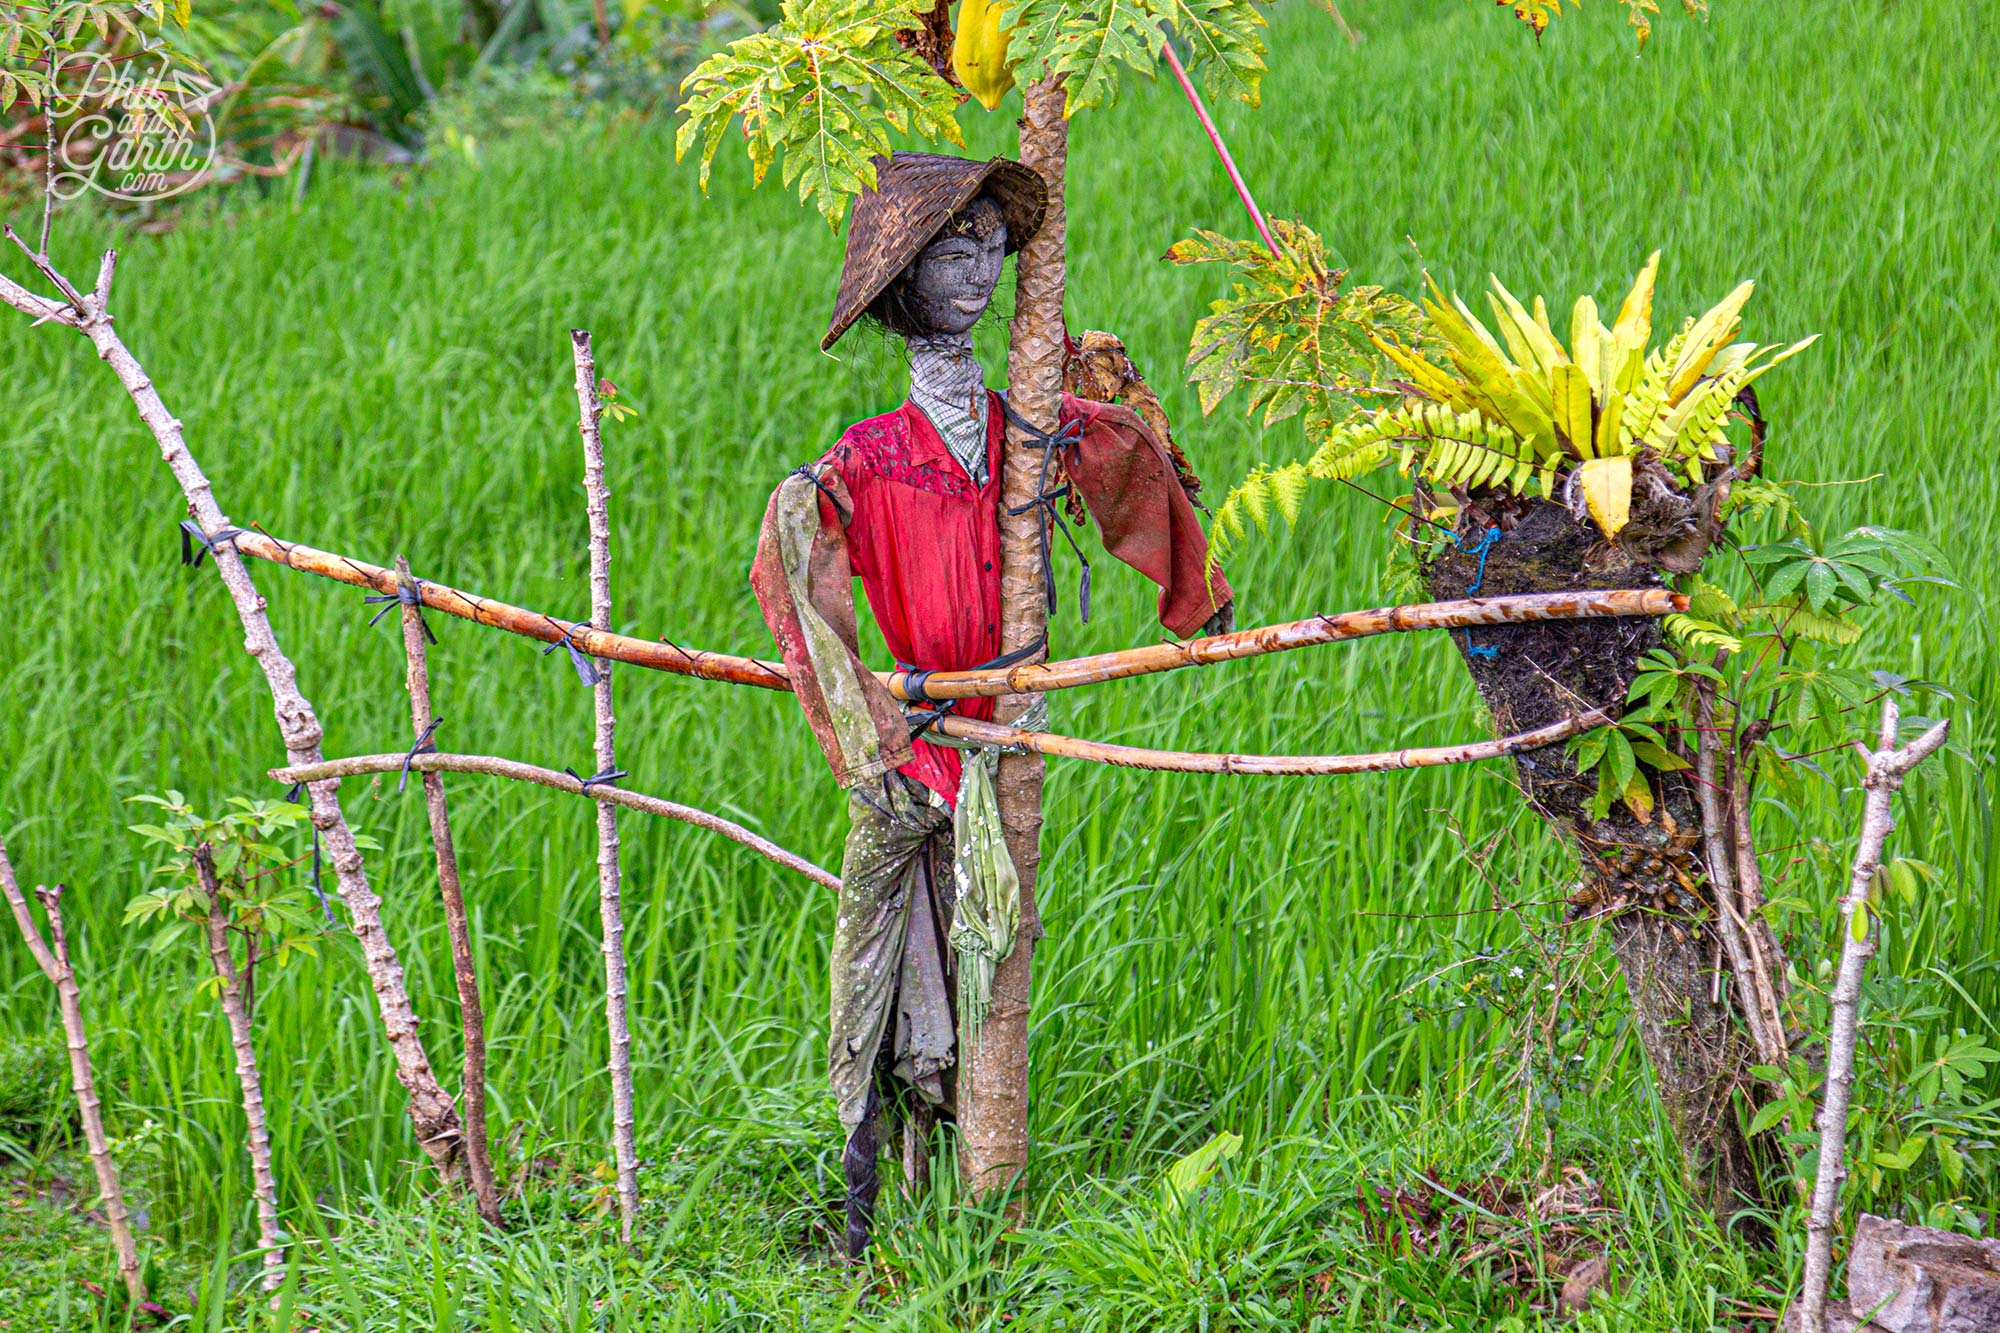 A scarecrow, Bali style in the middle of a field